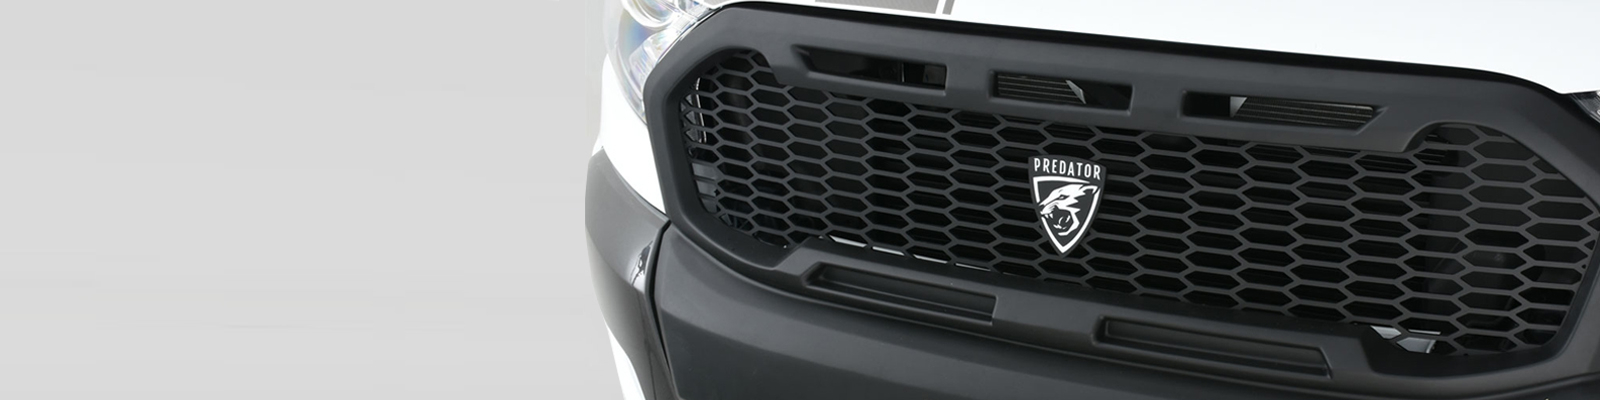 Grille Styling